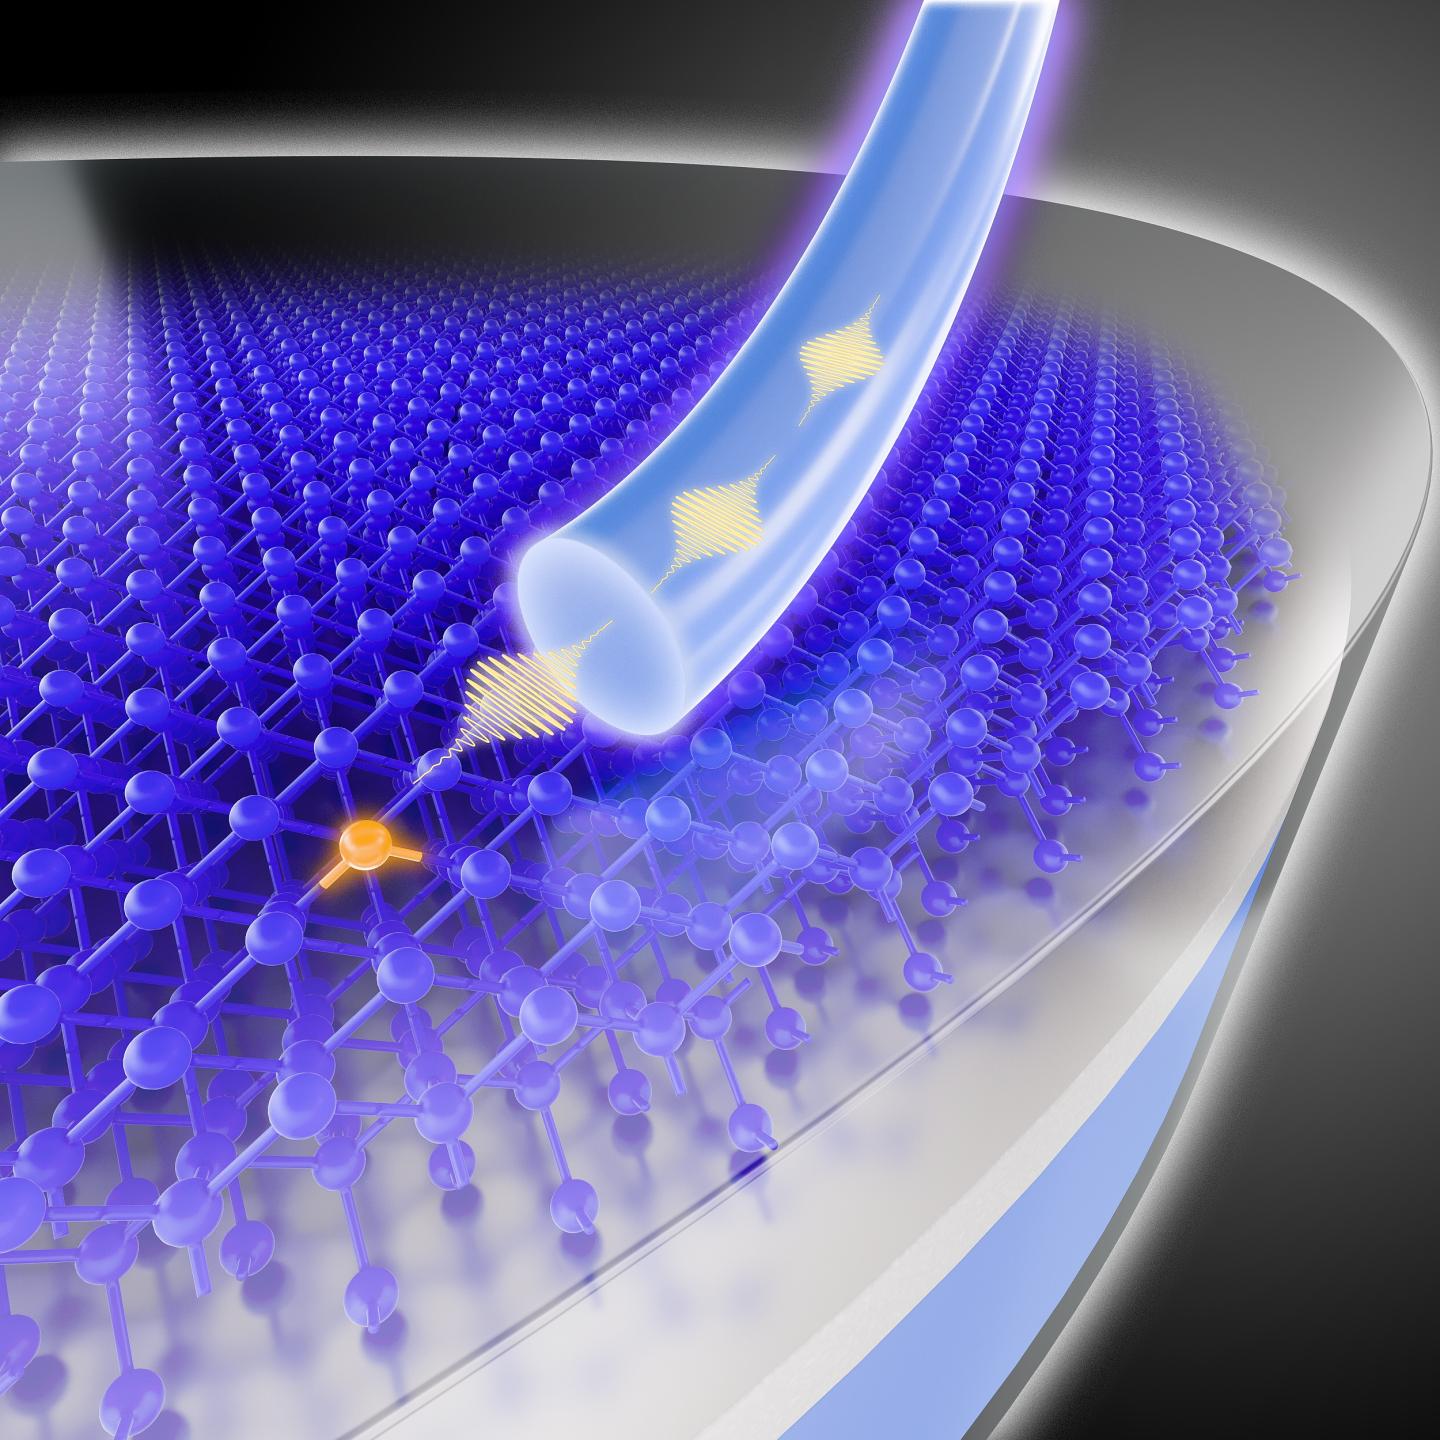 Single Photons from a Silicon Chip